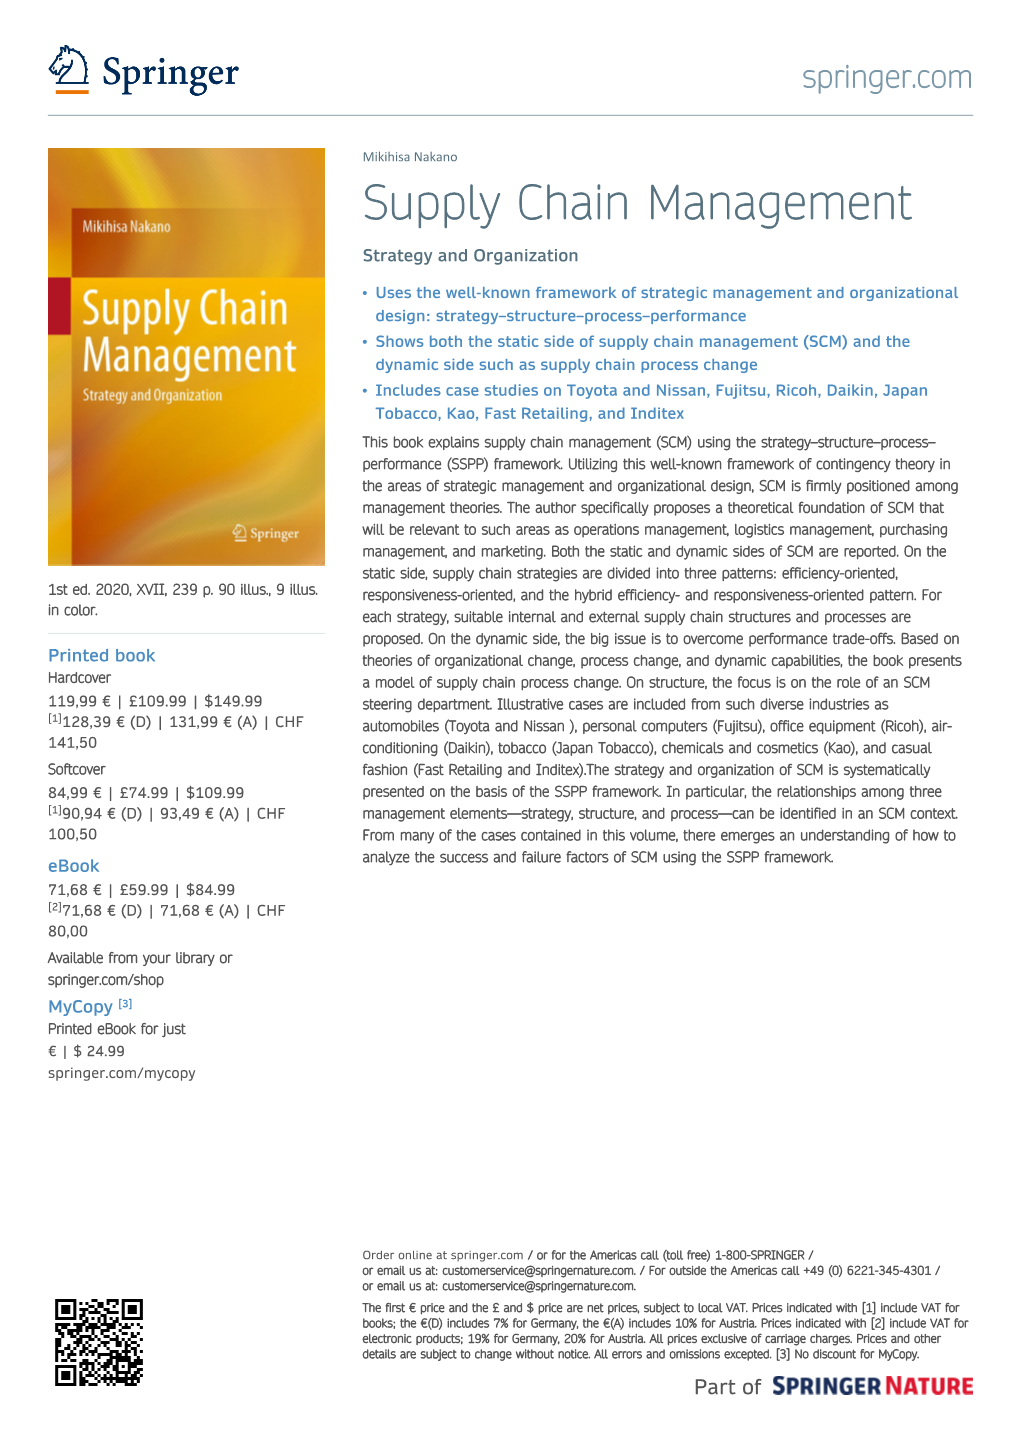 Supply Chain Management Strategy and Organization